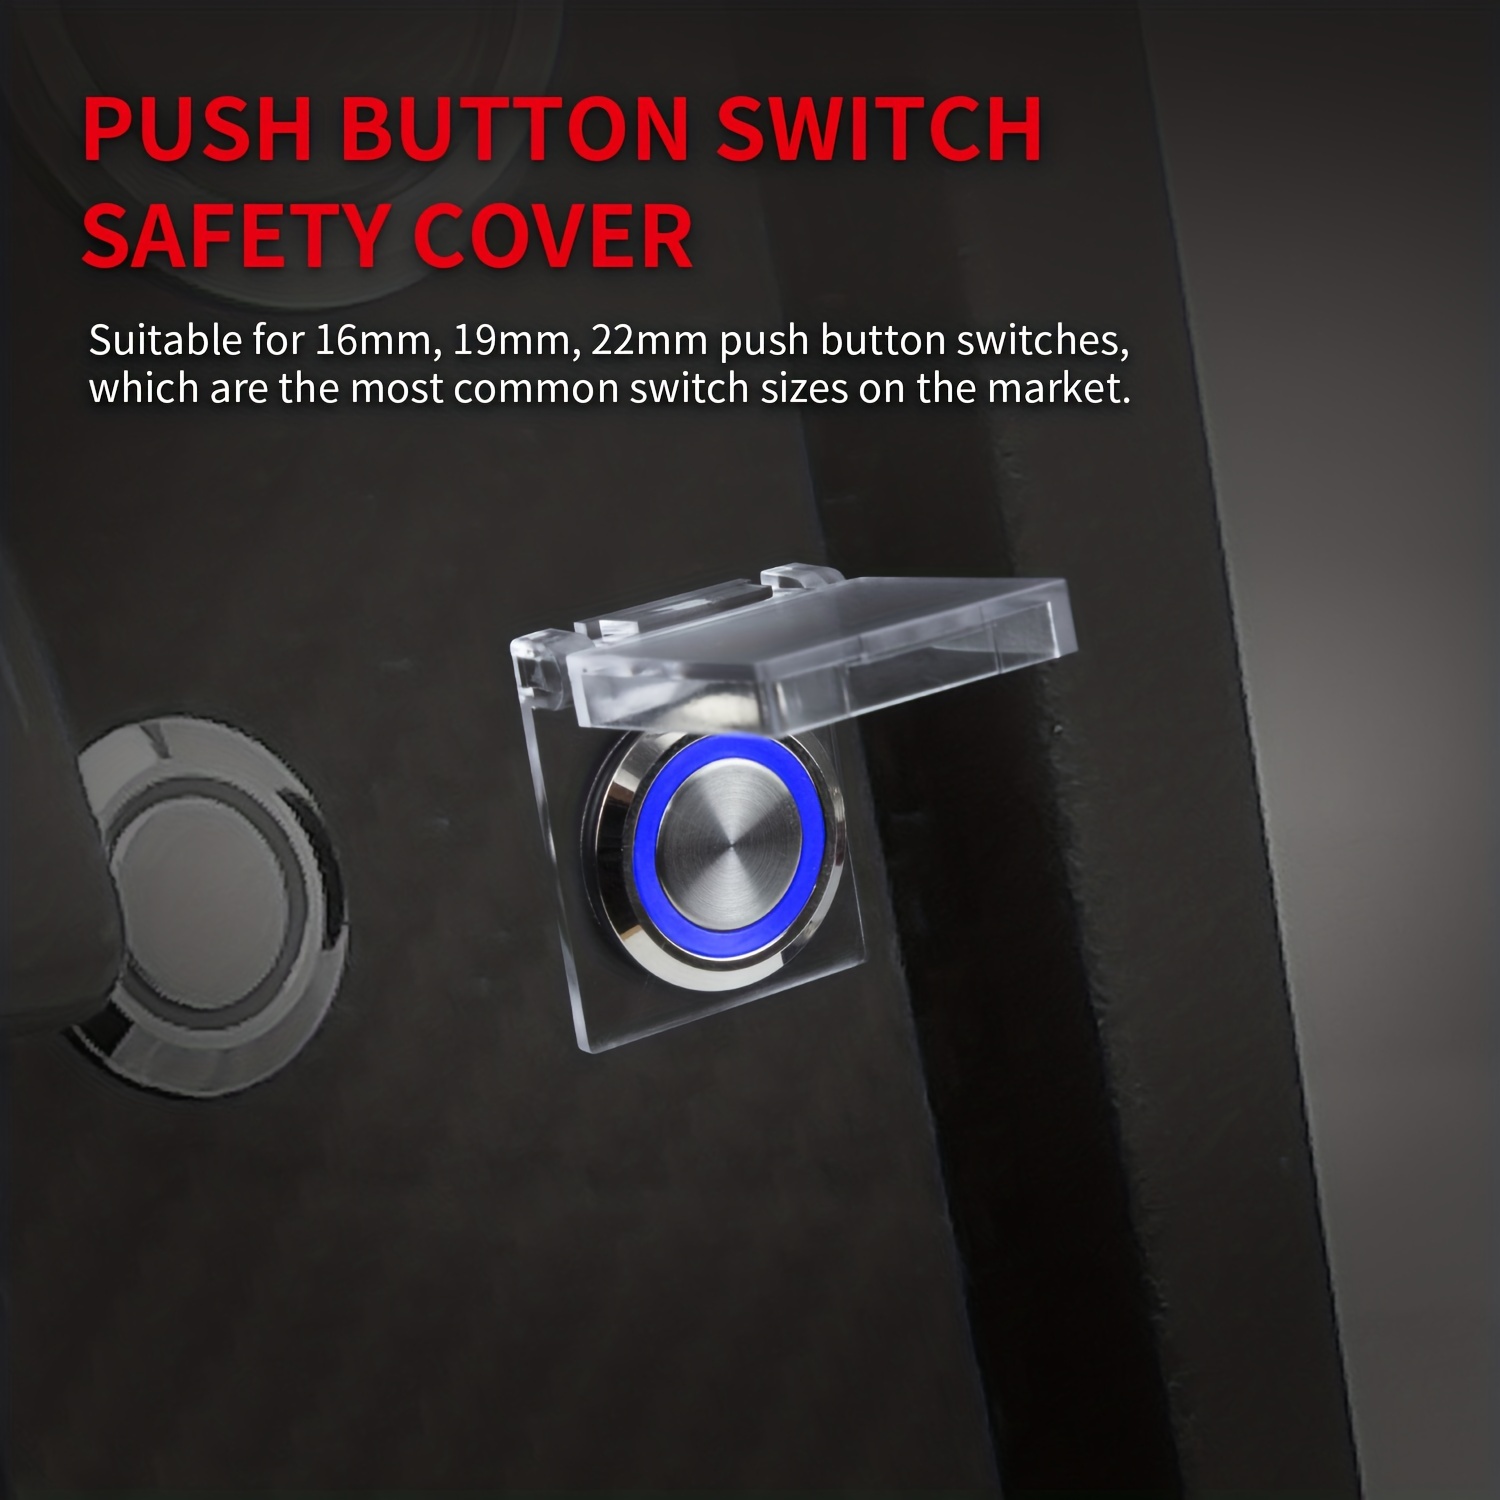 Power Push Button Switch Cover, Dustproof Safety Power Push Button Switch  Cover Protector for 22mm Power Push Button SwitchComputer PC Desktop